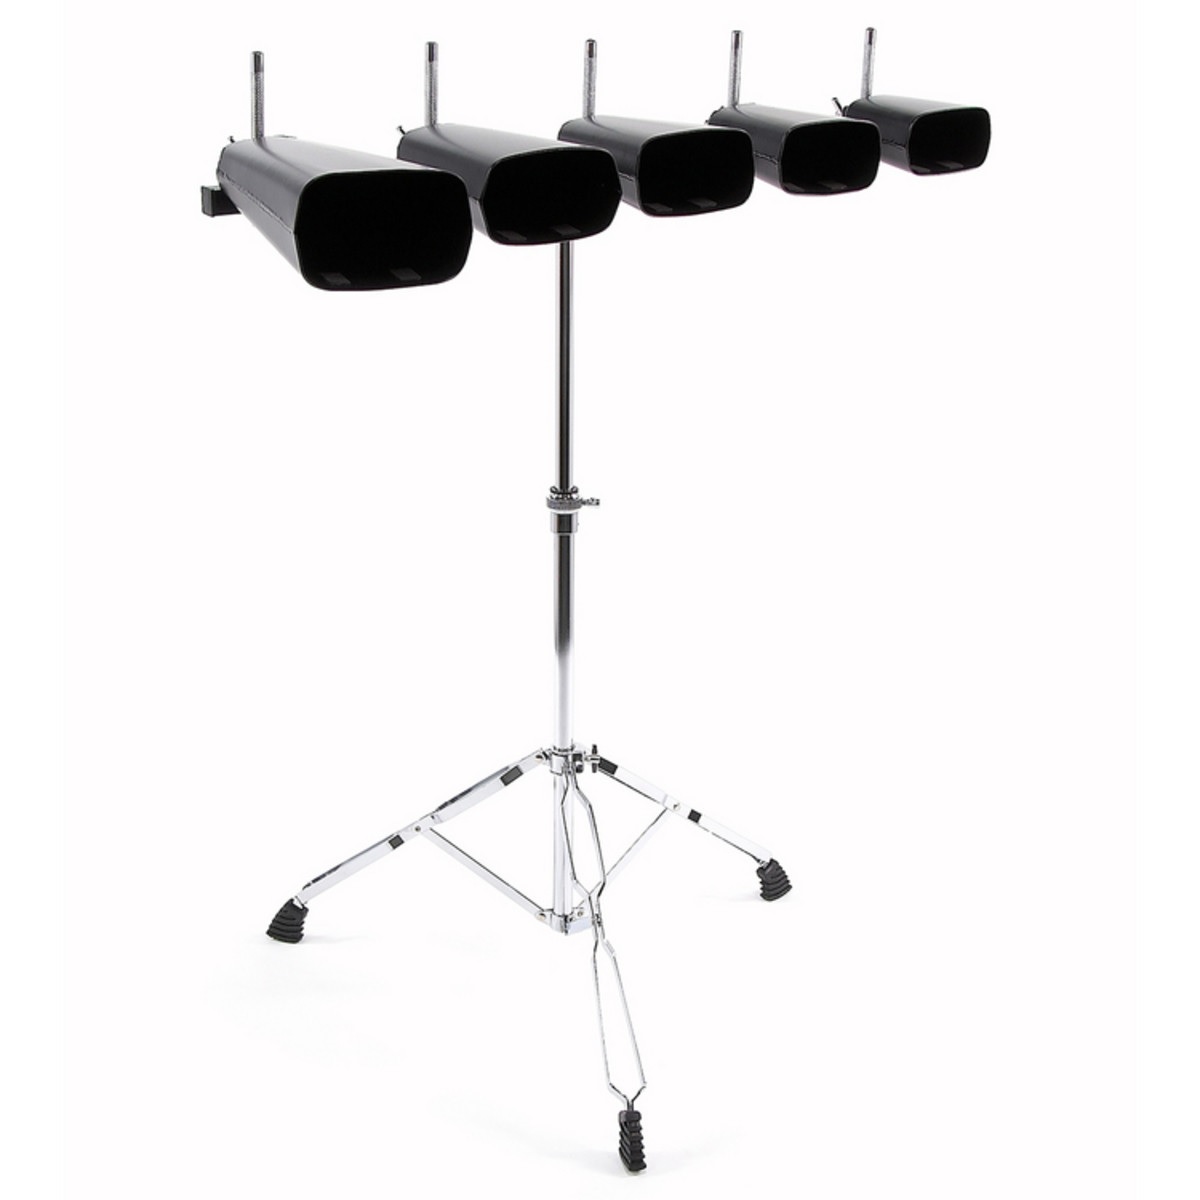 Set of 5 cowbell with doublefeet and adjustable heigh stand.